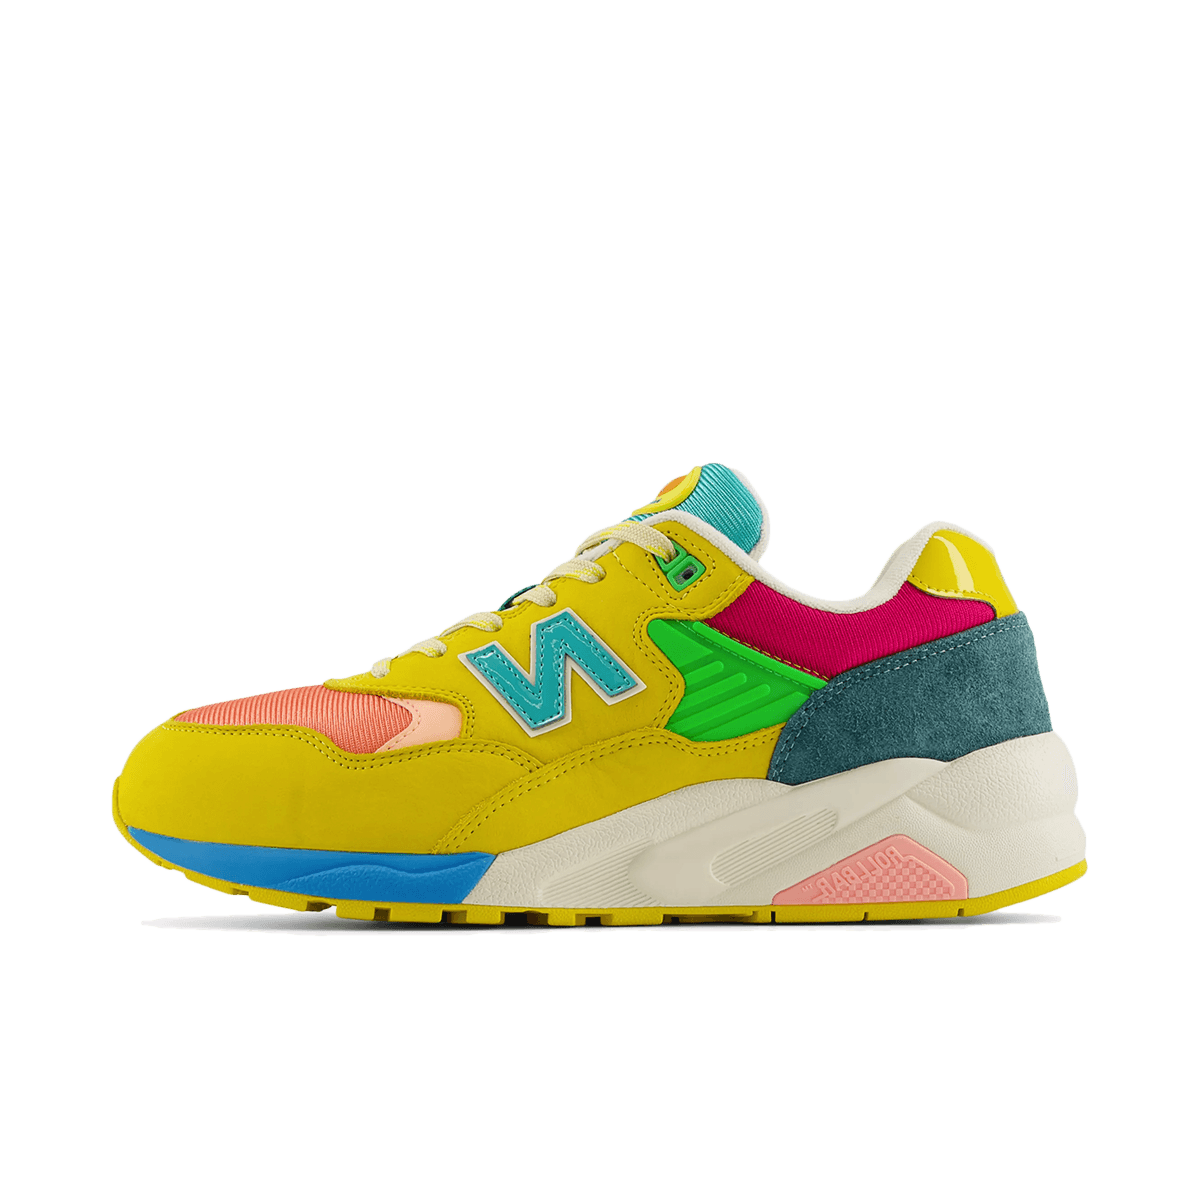 New Balance 580 'Yellow & Teal' - Patent Pack